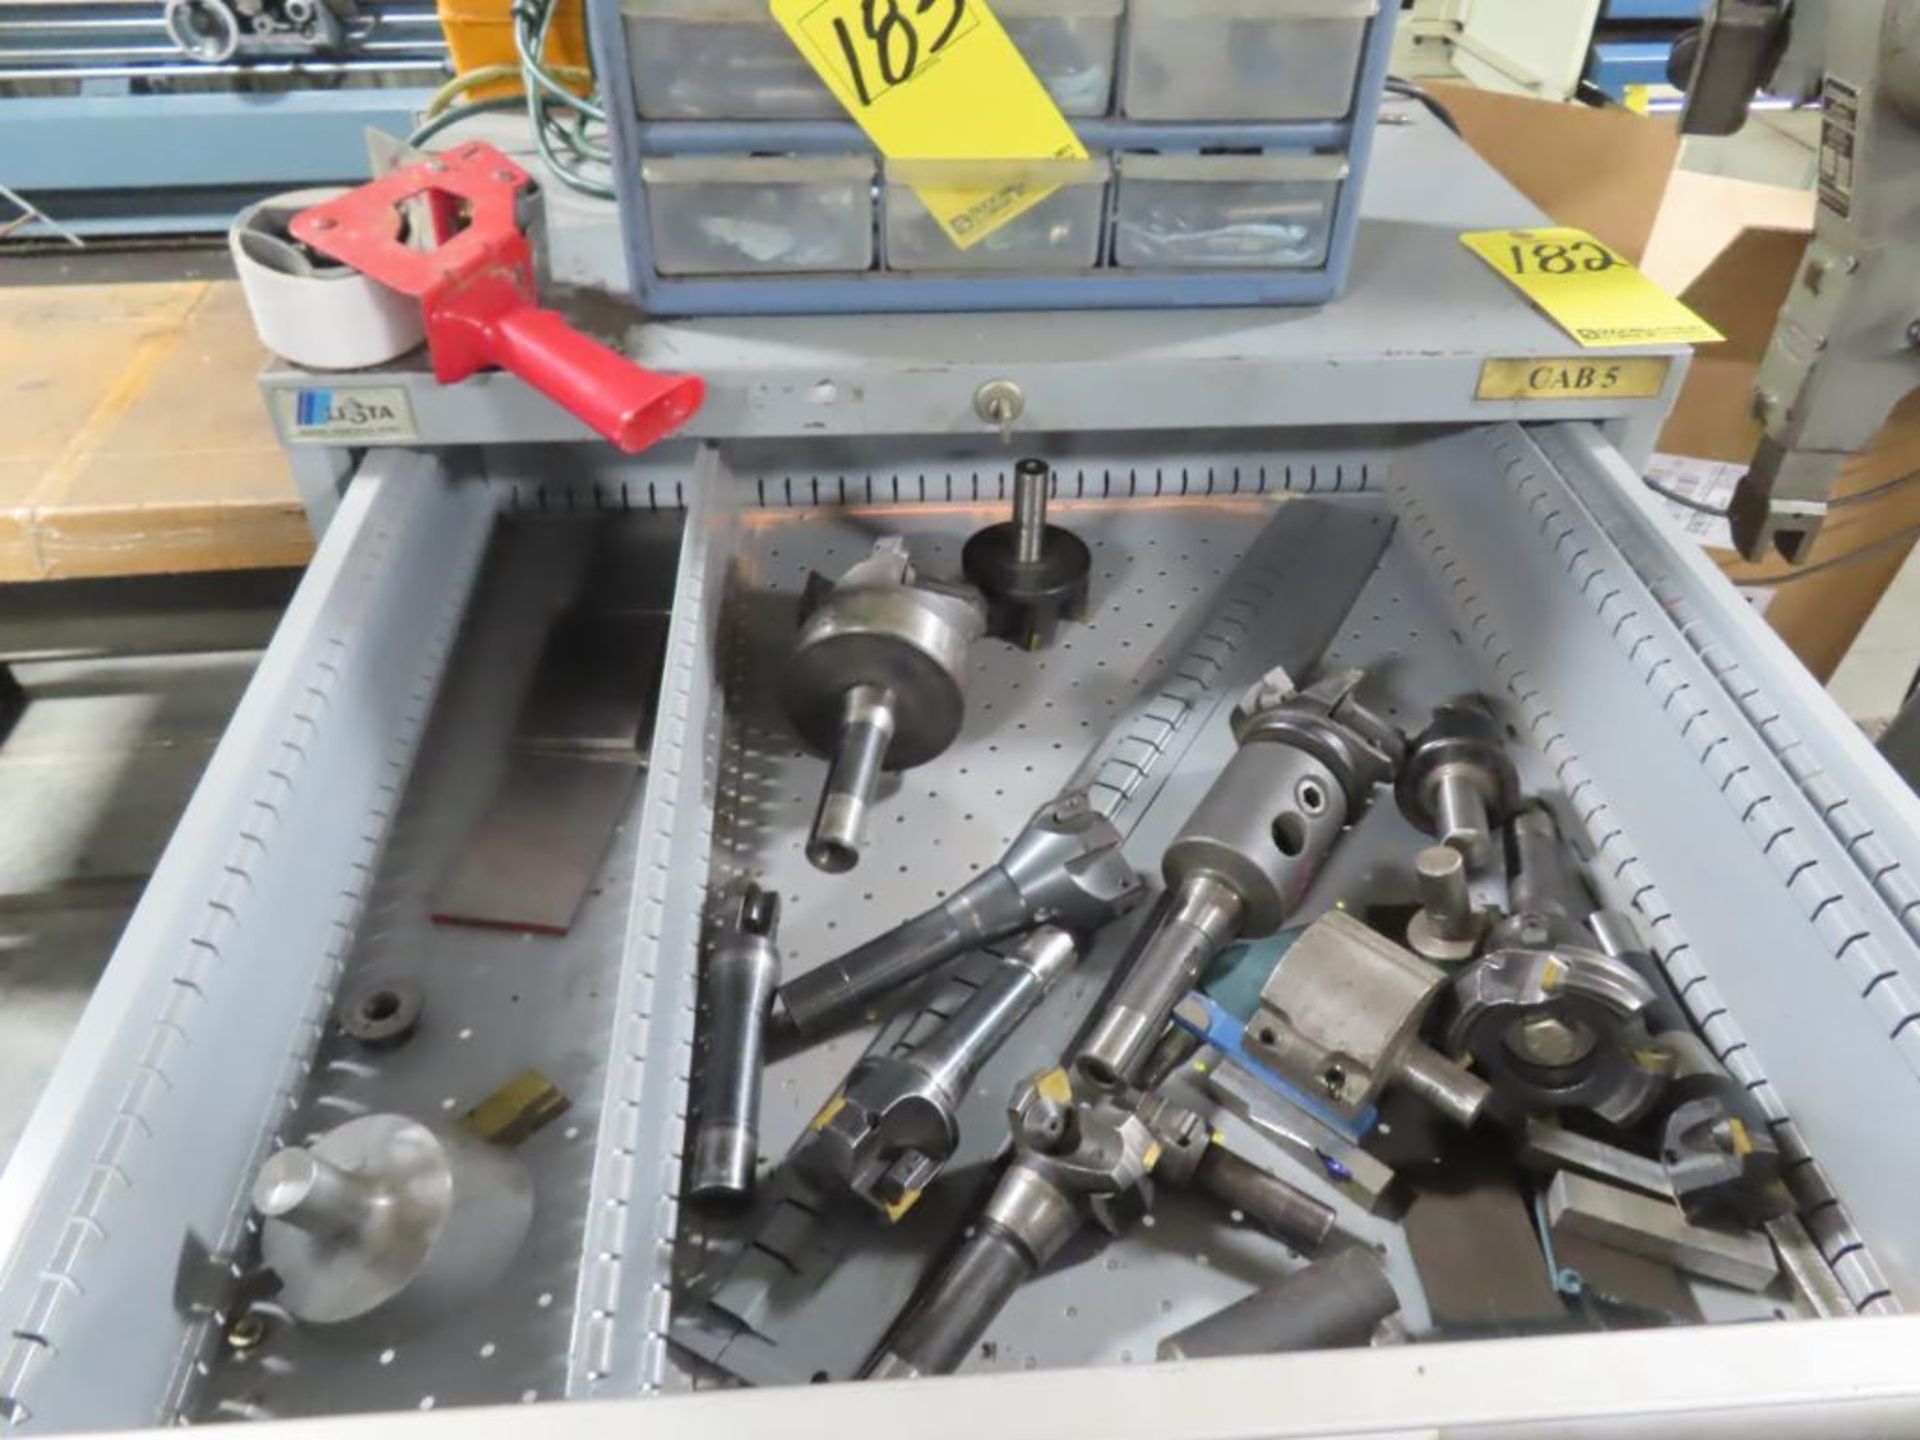 CONTENT OF TOOL CABINET DRAWER - FACE CUTTERS, MISC. INSERT TOOLS